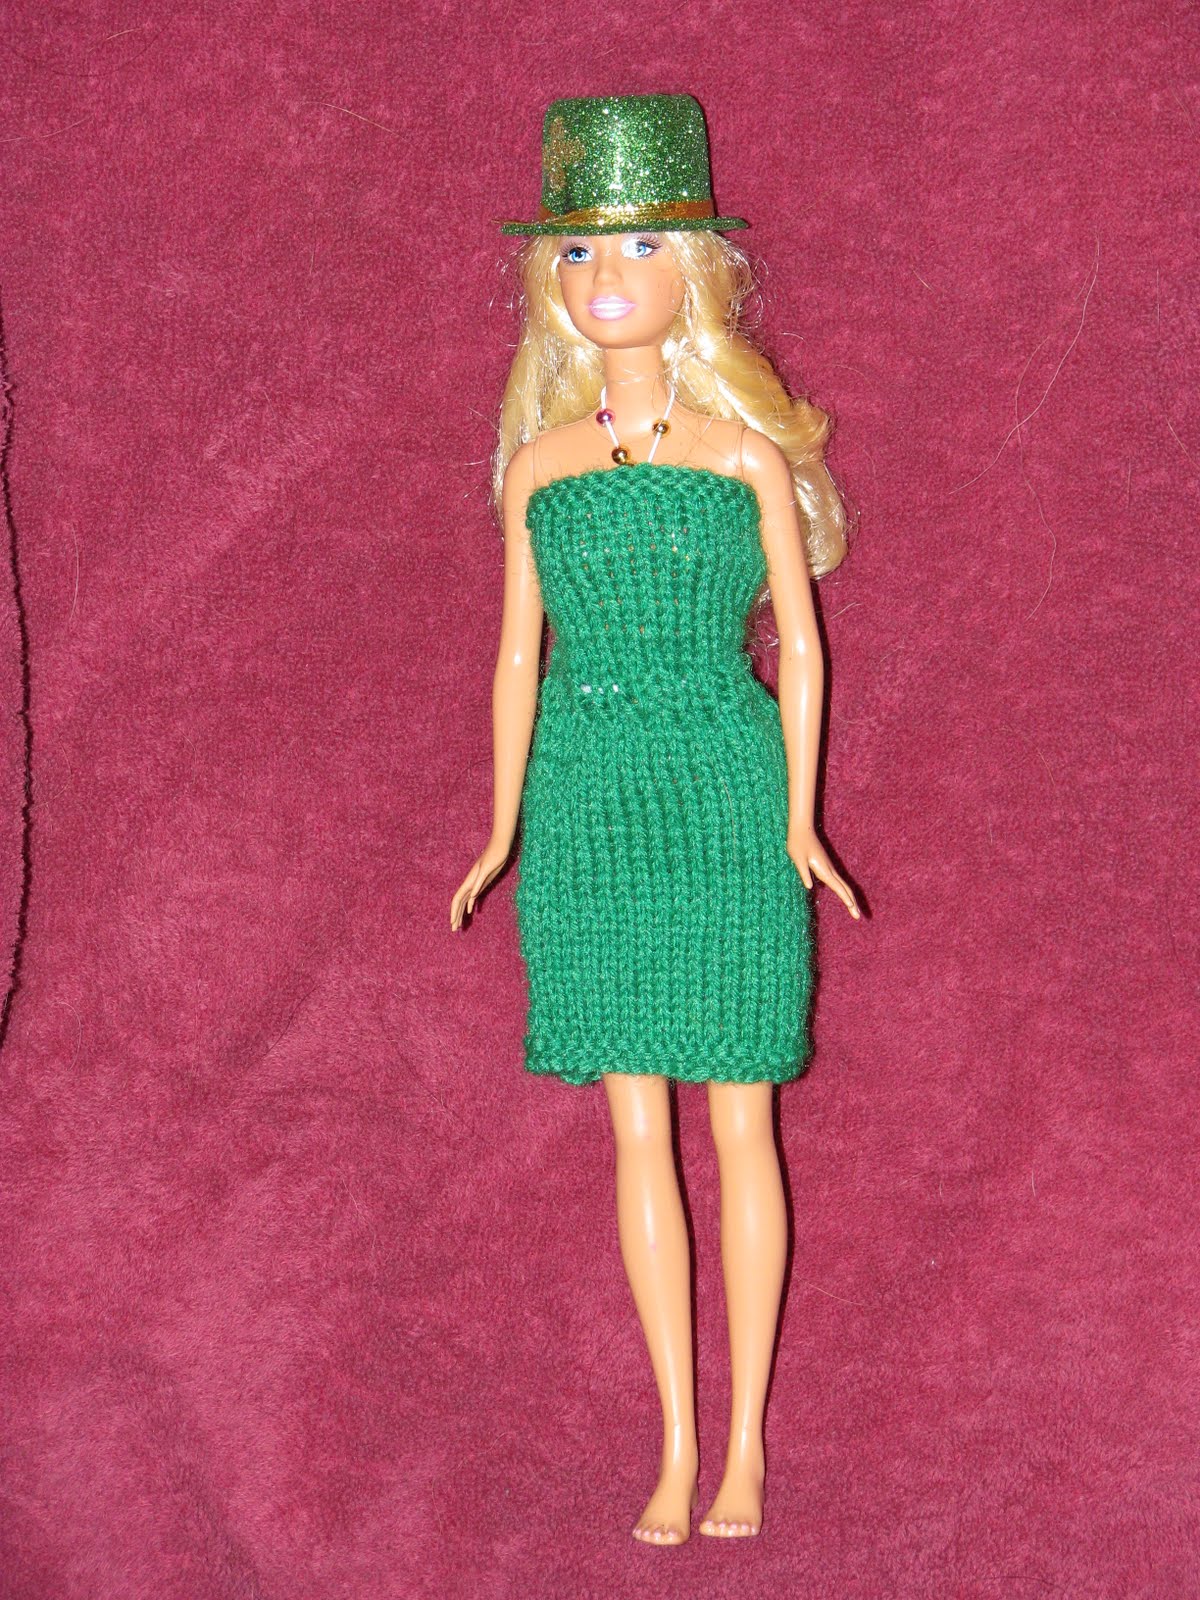 Free Barbie or 11.5 fashion doll clothes crochet patterns for